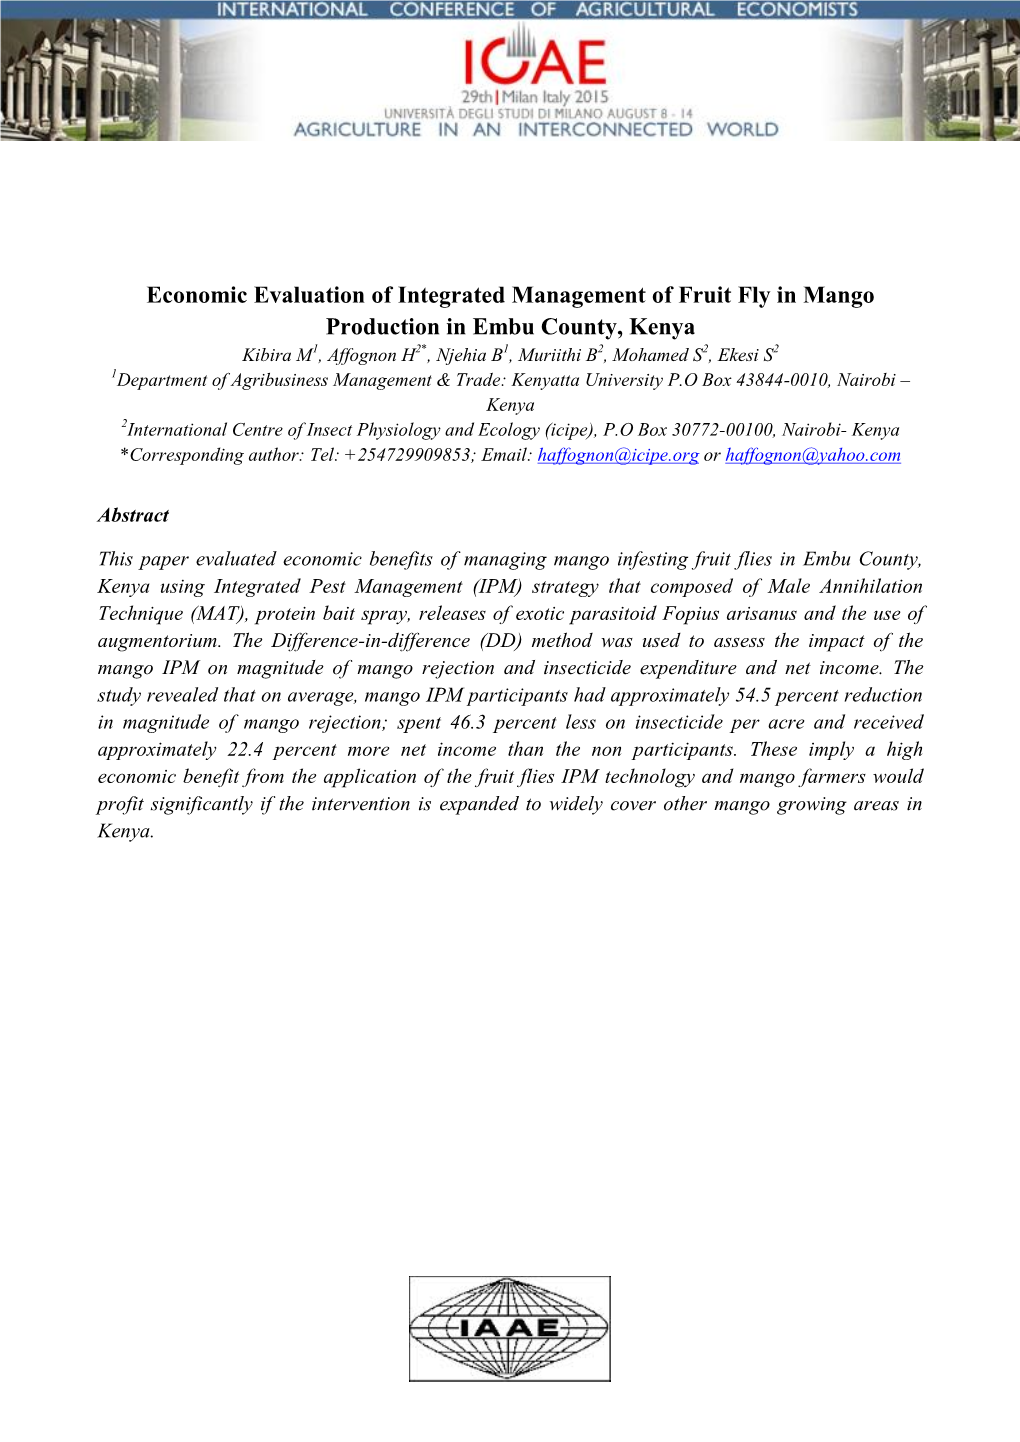 Economic Evaluation of Integrated Management of Fruit Fly in Mango